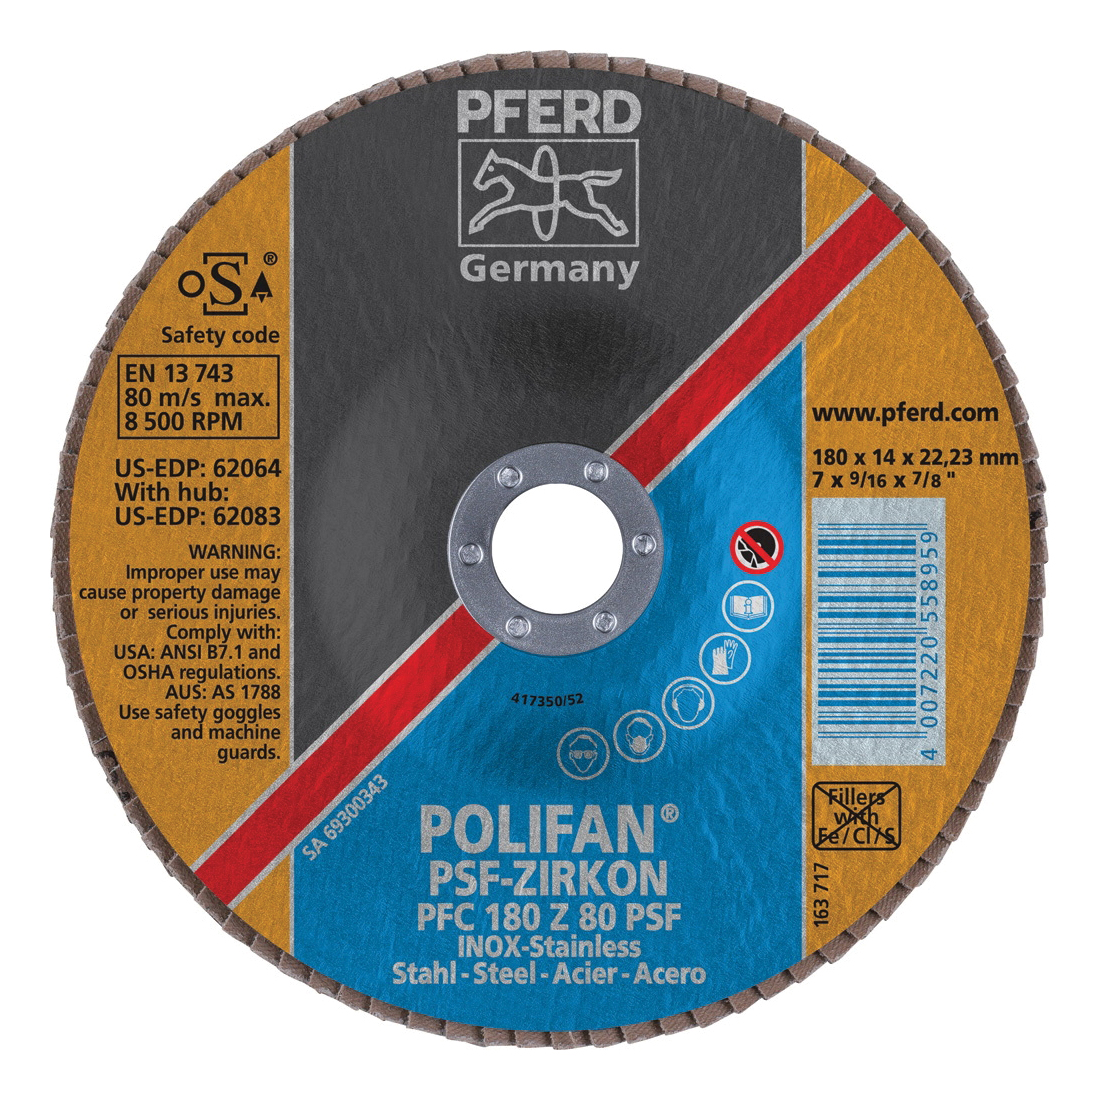 PFERD Polifan® 62064 Universal Line PSF-Z Unthreaded Coated Abrasive Flap Disc, 7 in Dia, 7/8 in Center Hole, 80 Grit, Zirconia Alumina Abrasive, Type 29 Conical Disc